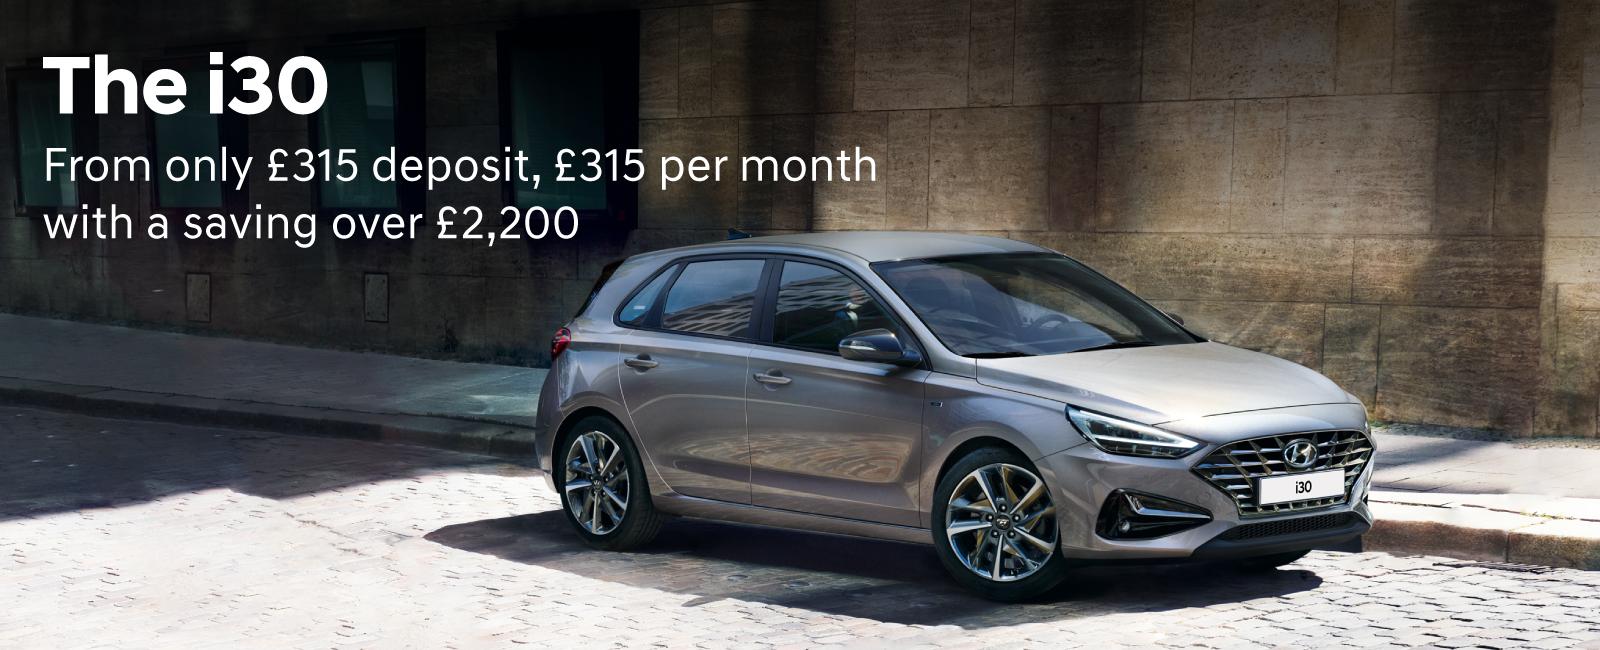 The Hyundai i30 from only £315 deposit, £315 per month